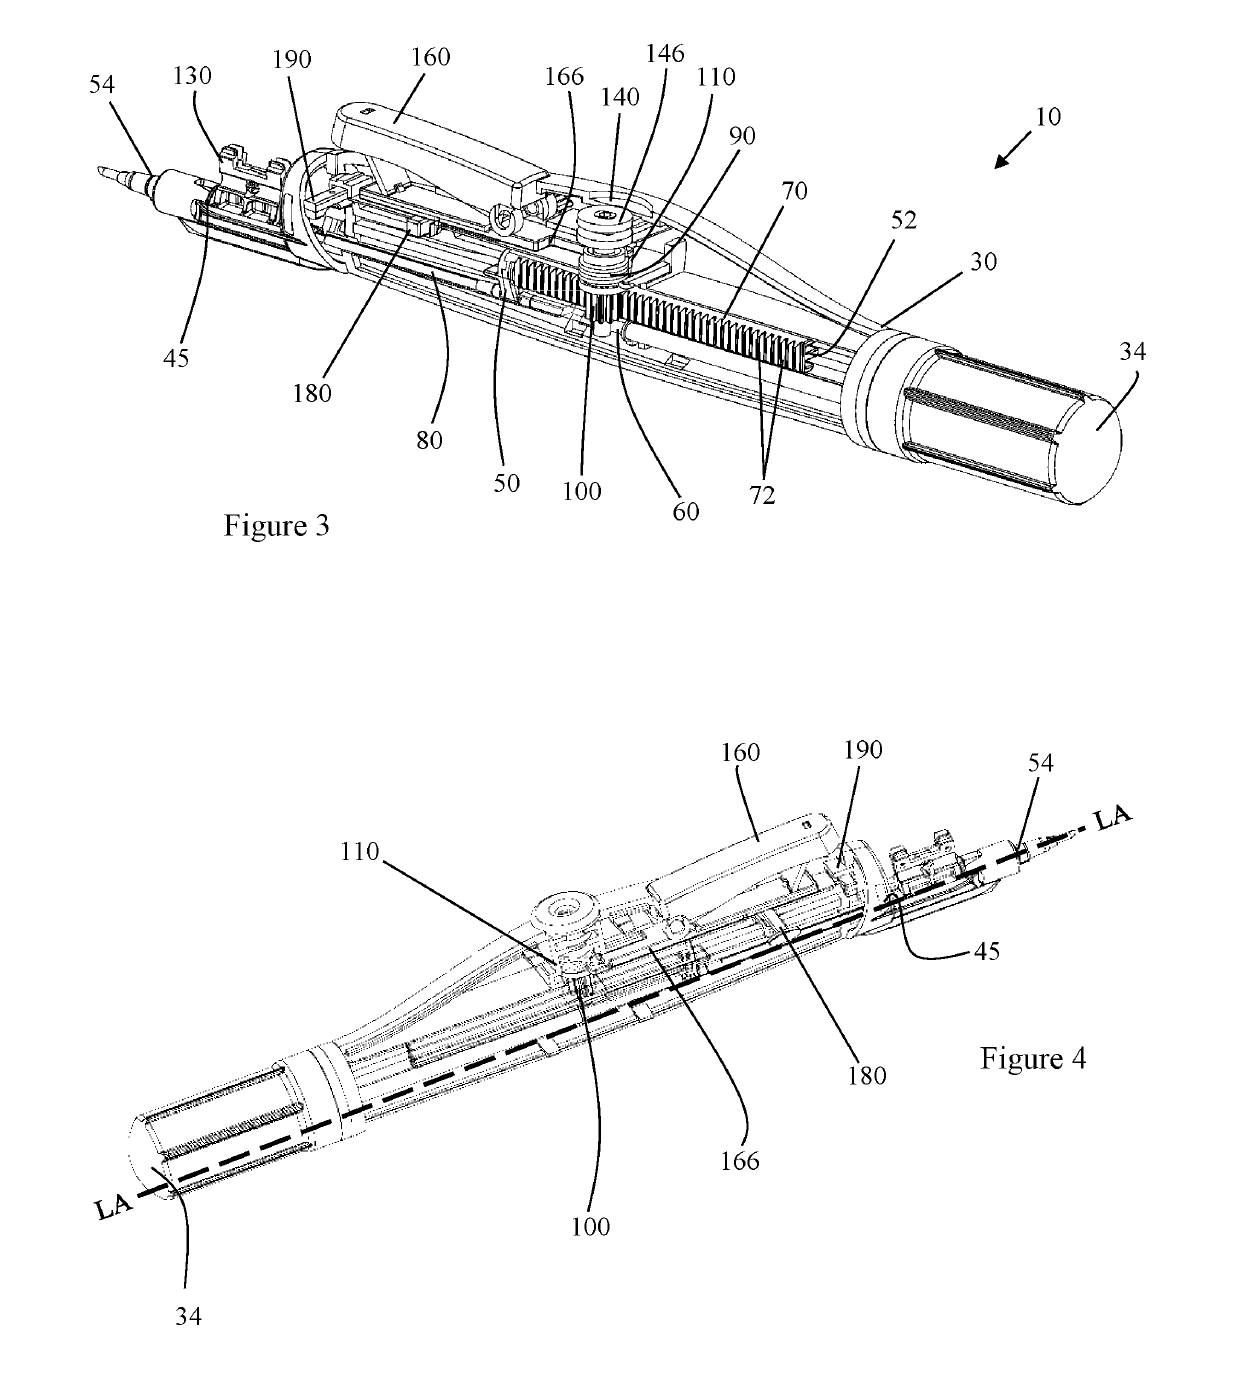 Injector assembly employing compressed gas and a mechanical brake for presenting an intraocular lens to a patient